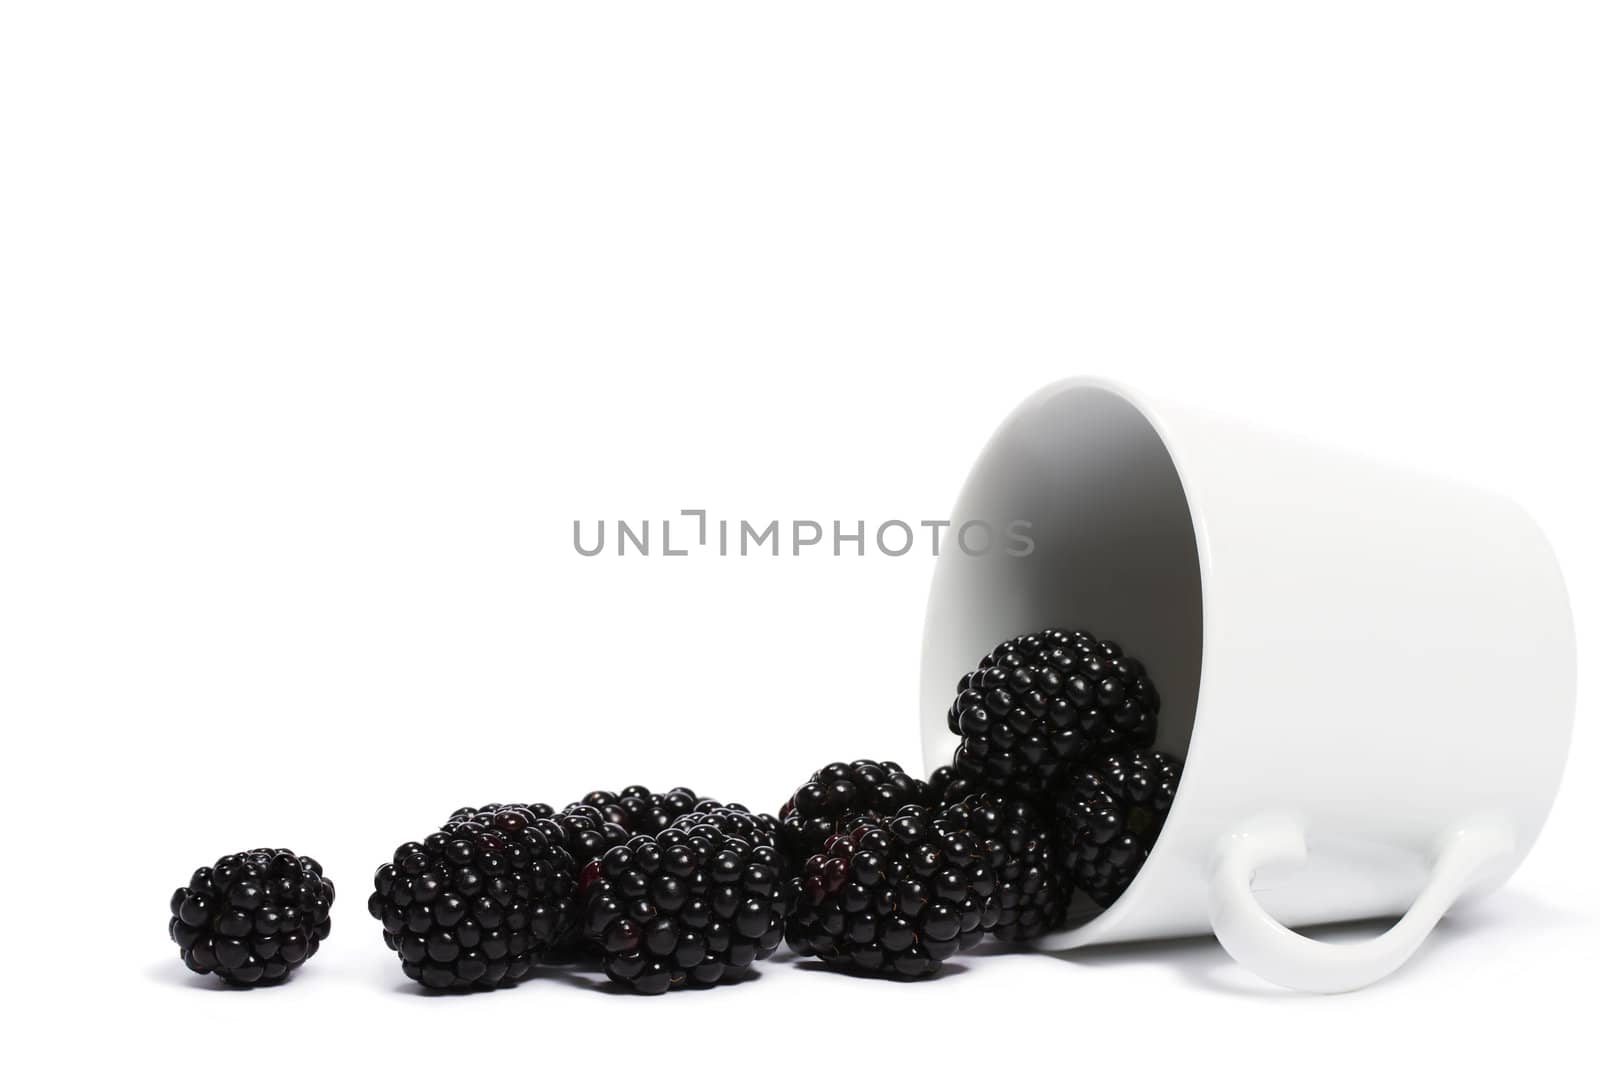 blackberries rolling from a fell over cup on white background